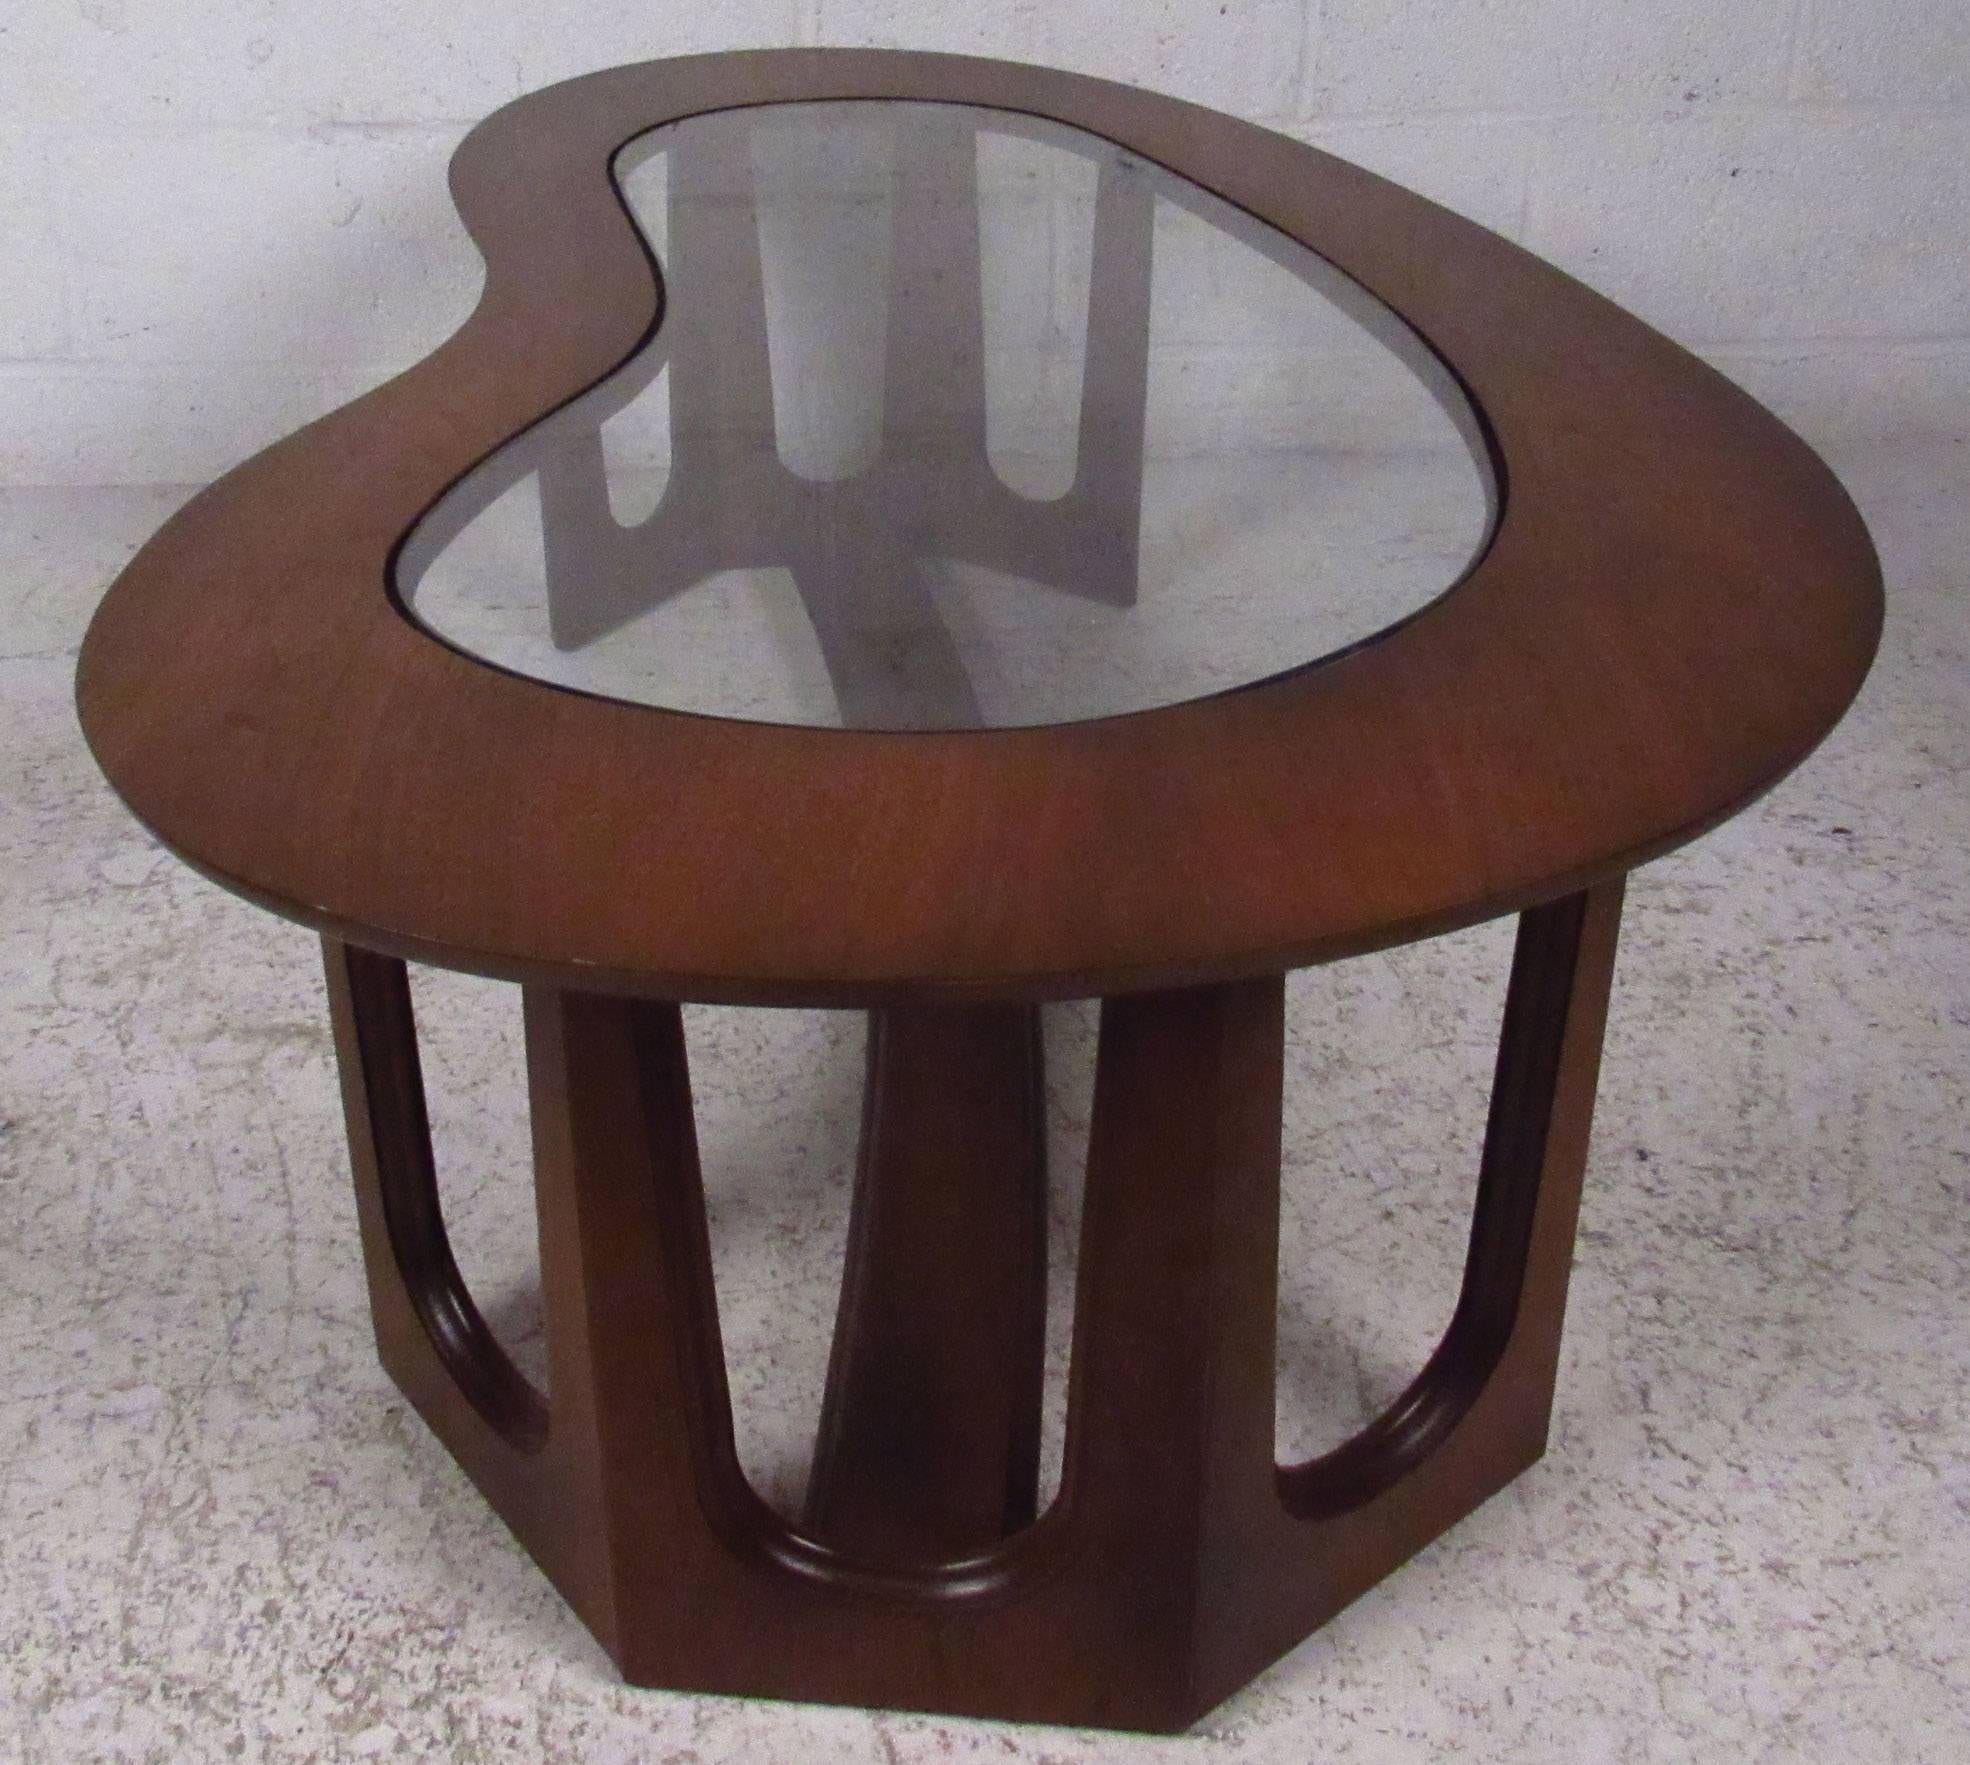 Vintage-modern walnut coffee table featuring kidney shape, glass inlay and beautifully sculpted base. Manufactured by Bassett Furniture.

Please confirm item location NY or NJ with dealer.